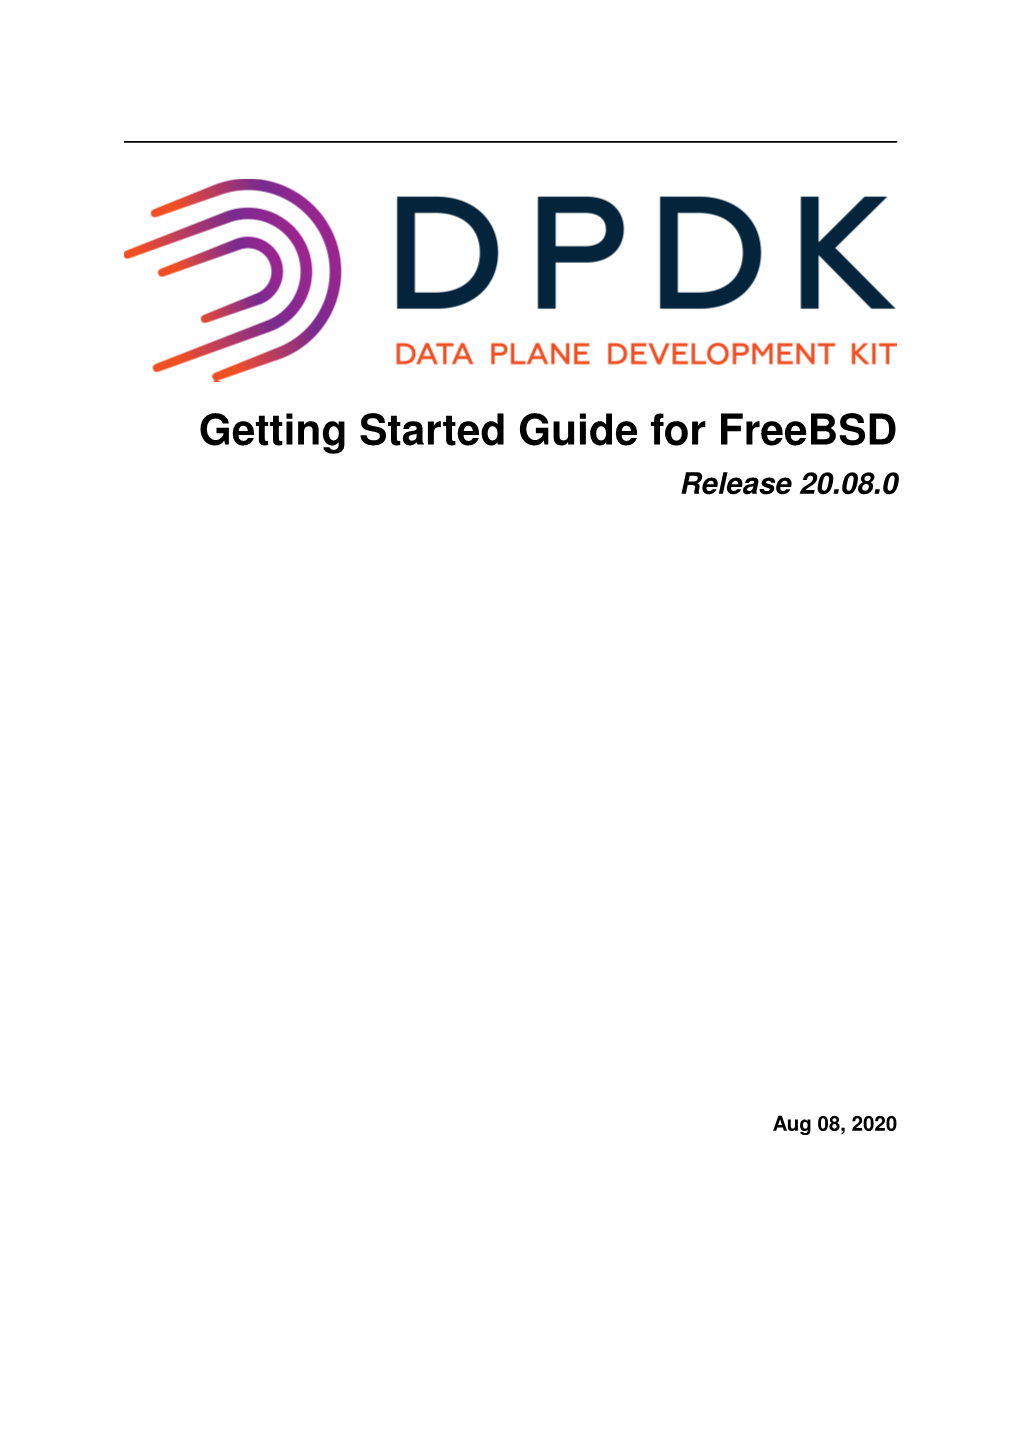 Getting Started Guide for Freebsd Release 20.08.0